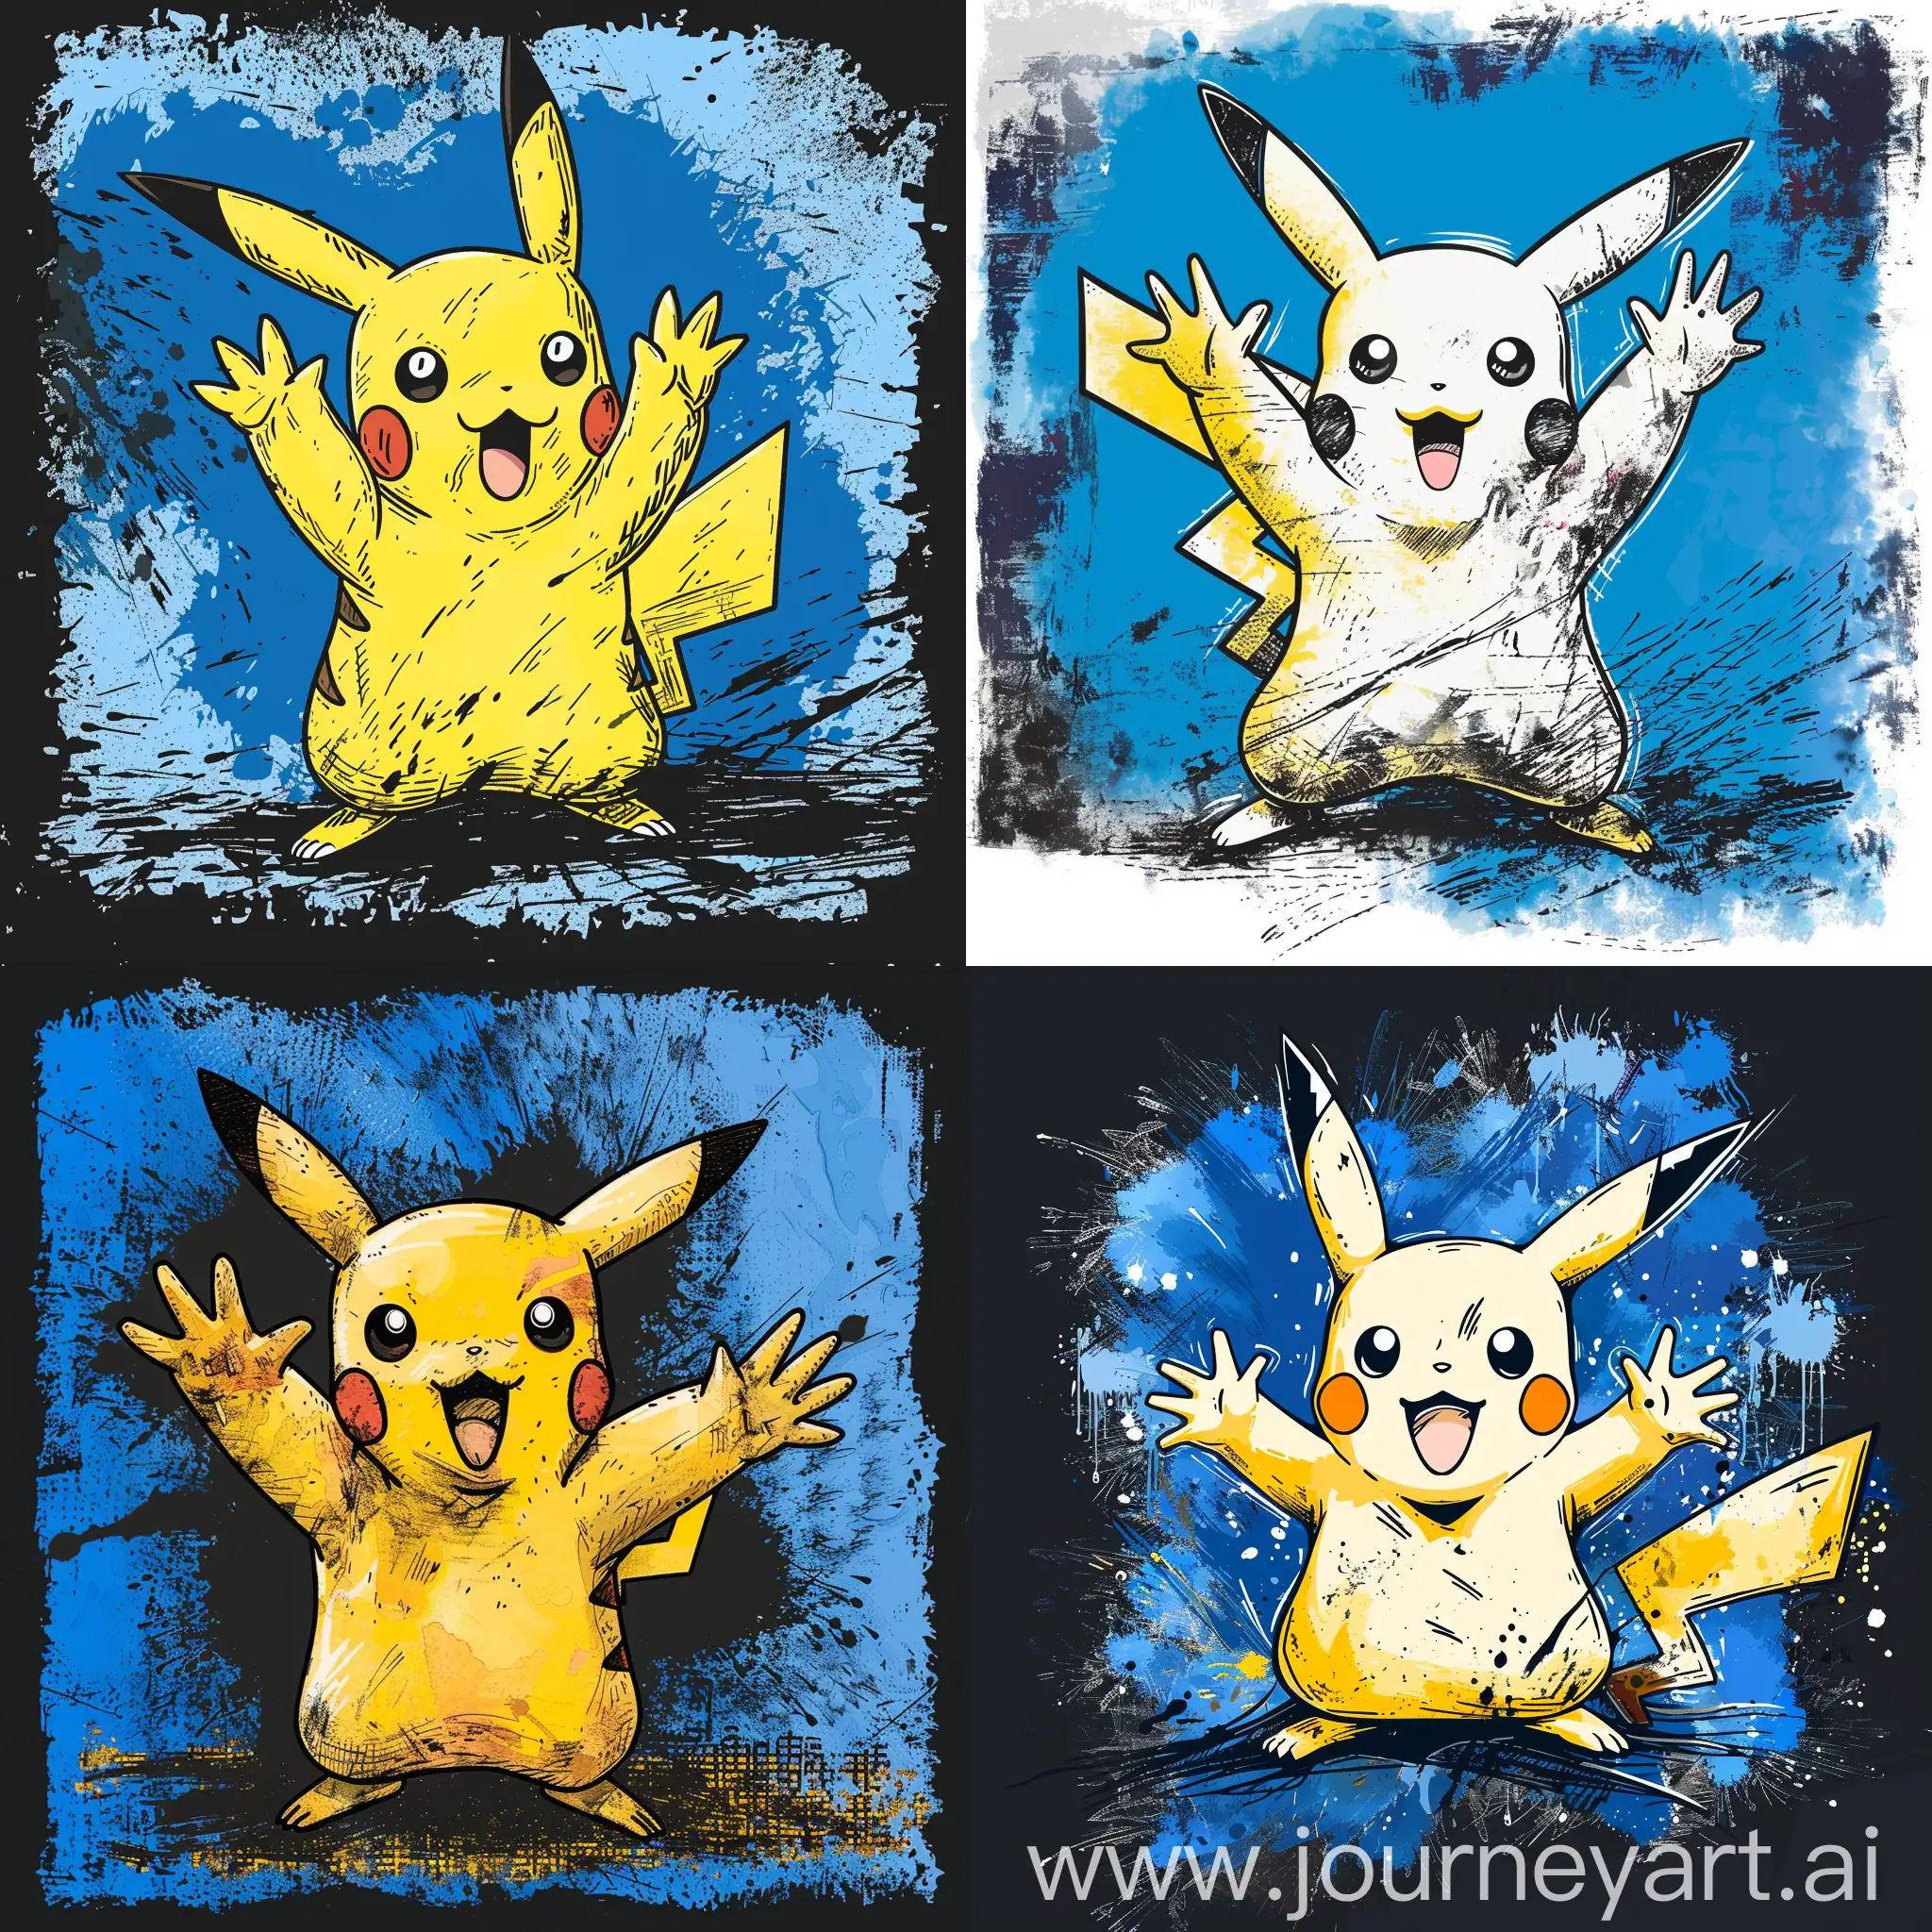 Ralph Steadman style character,A cute Pikachu  with hands up in a thick line hand-drawn style, plush feeling, vector file, watercolor, blue and black background , rough, minimalism, front view